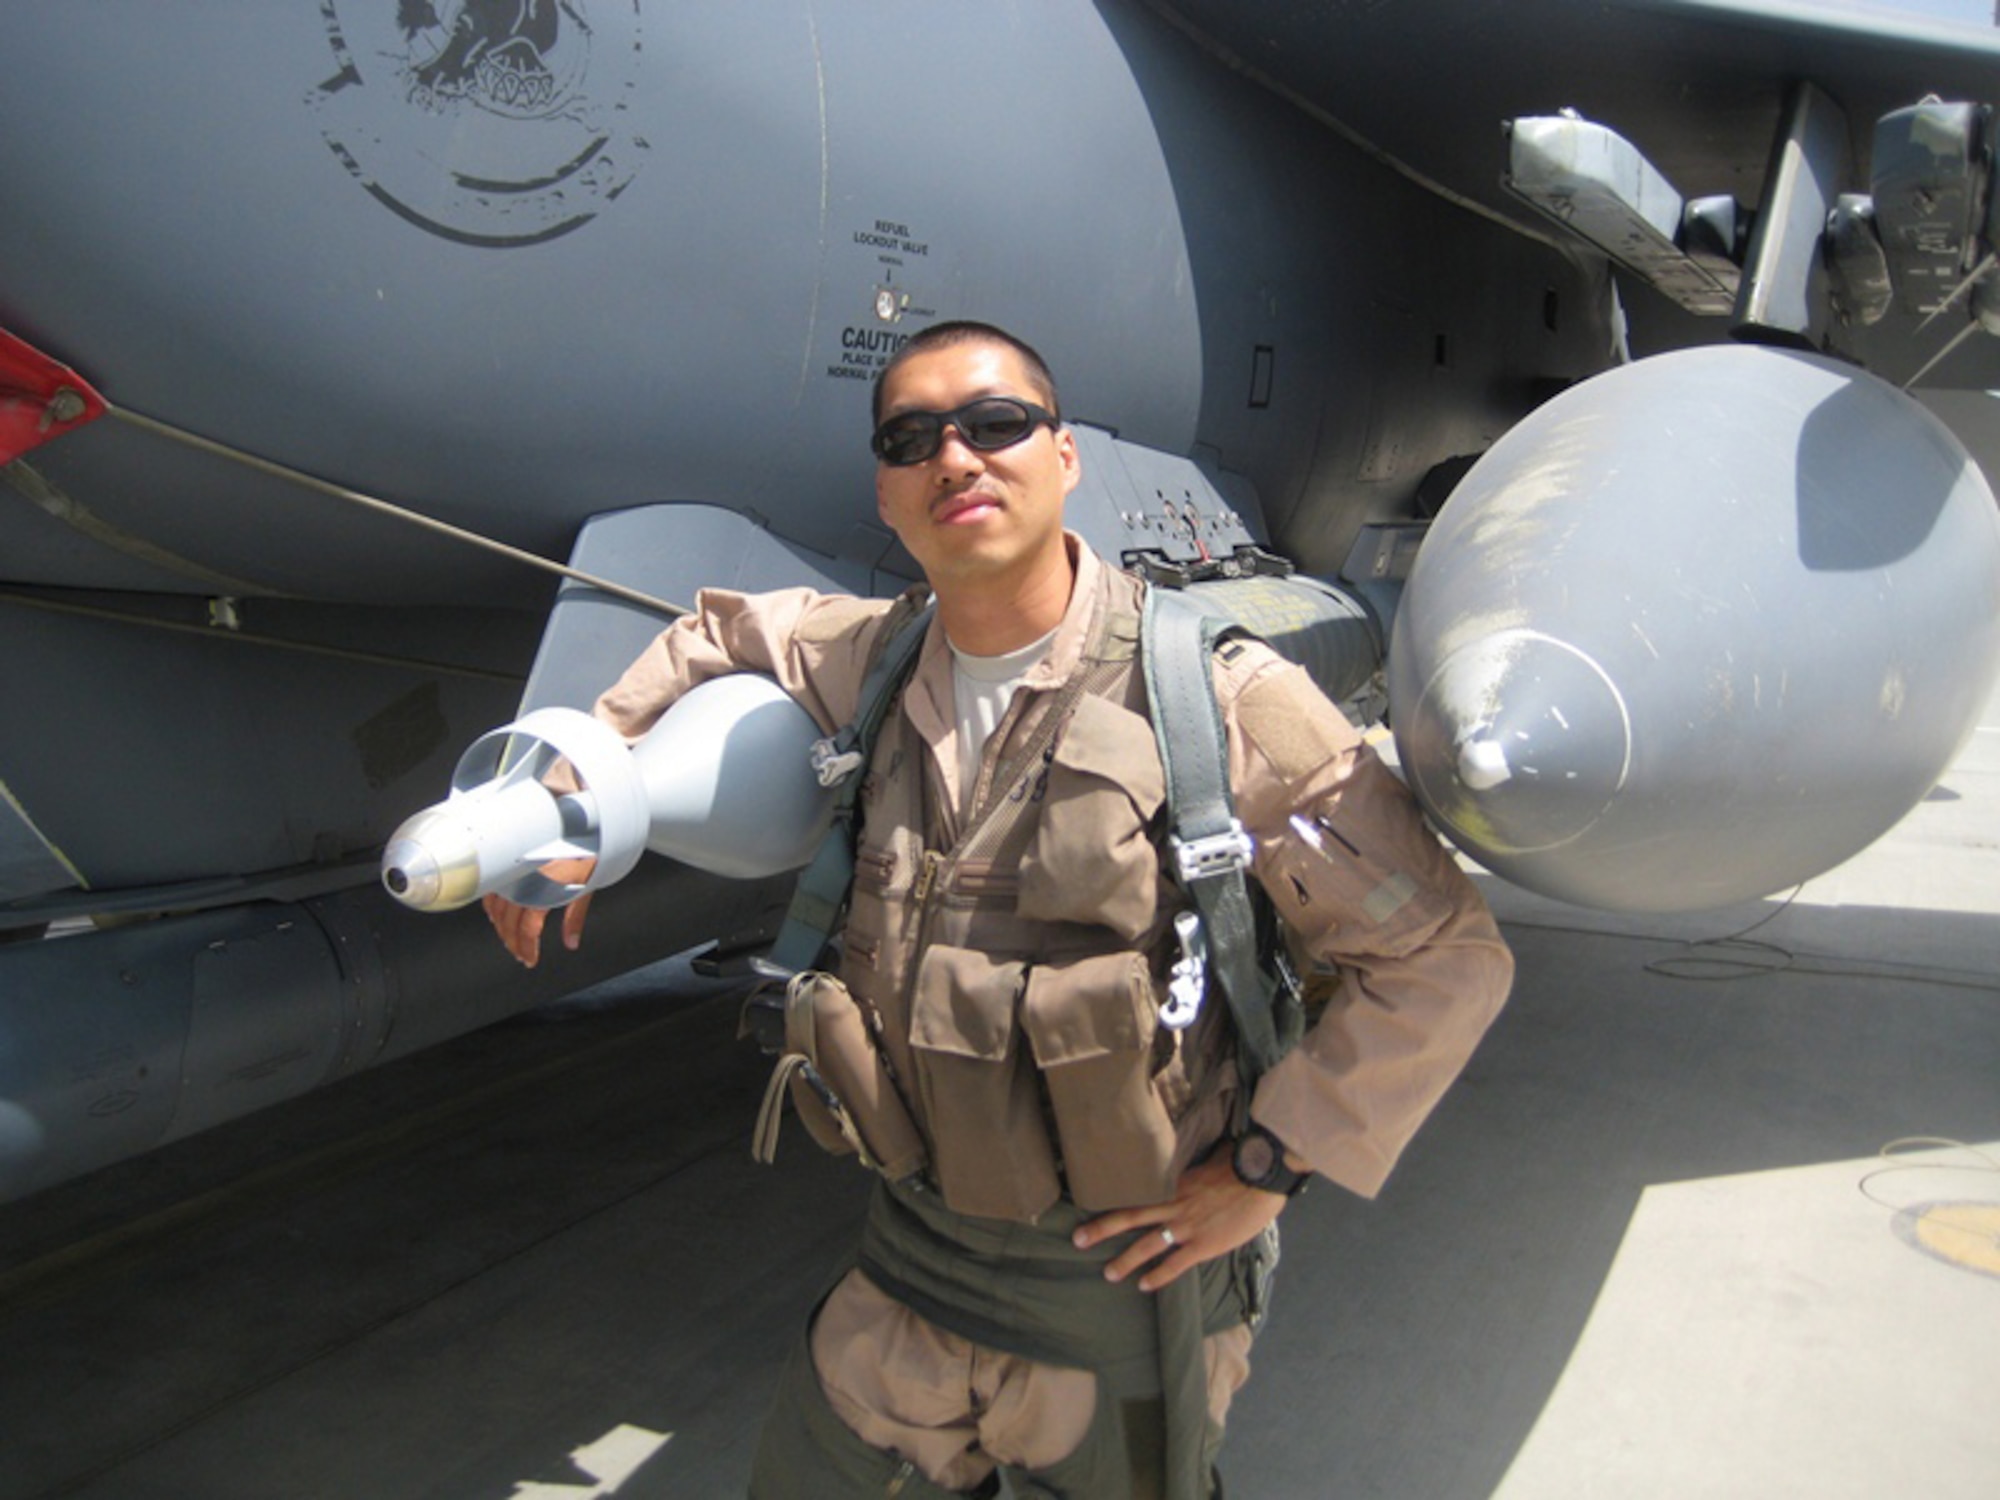 Then Capt. Jay Park, takes a photo before his first deployment sortie, prior to the walk around in front of his jet with his arms around the GBU-12, laser guided bomb.